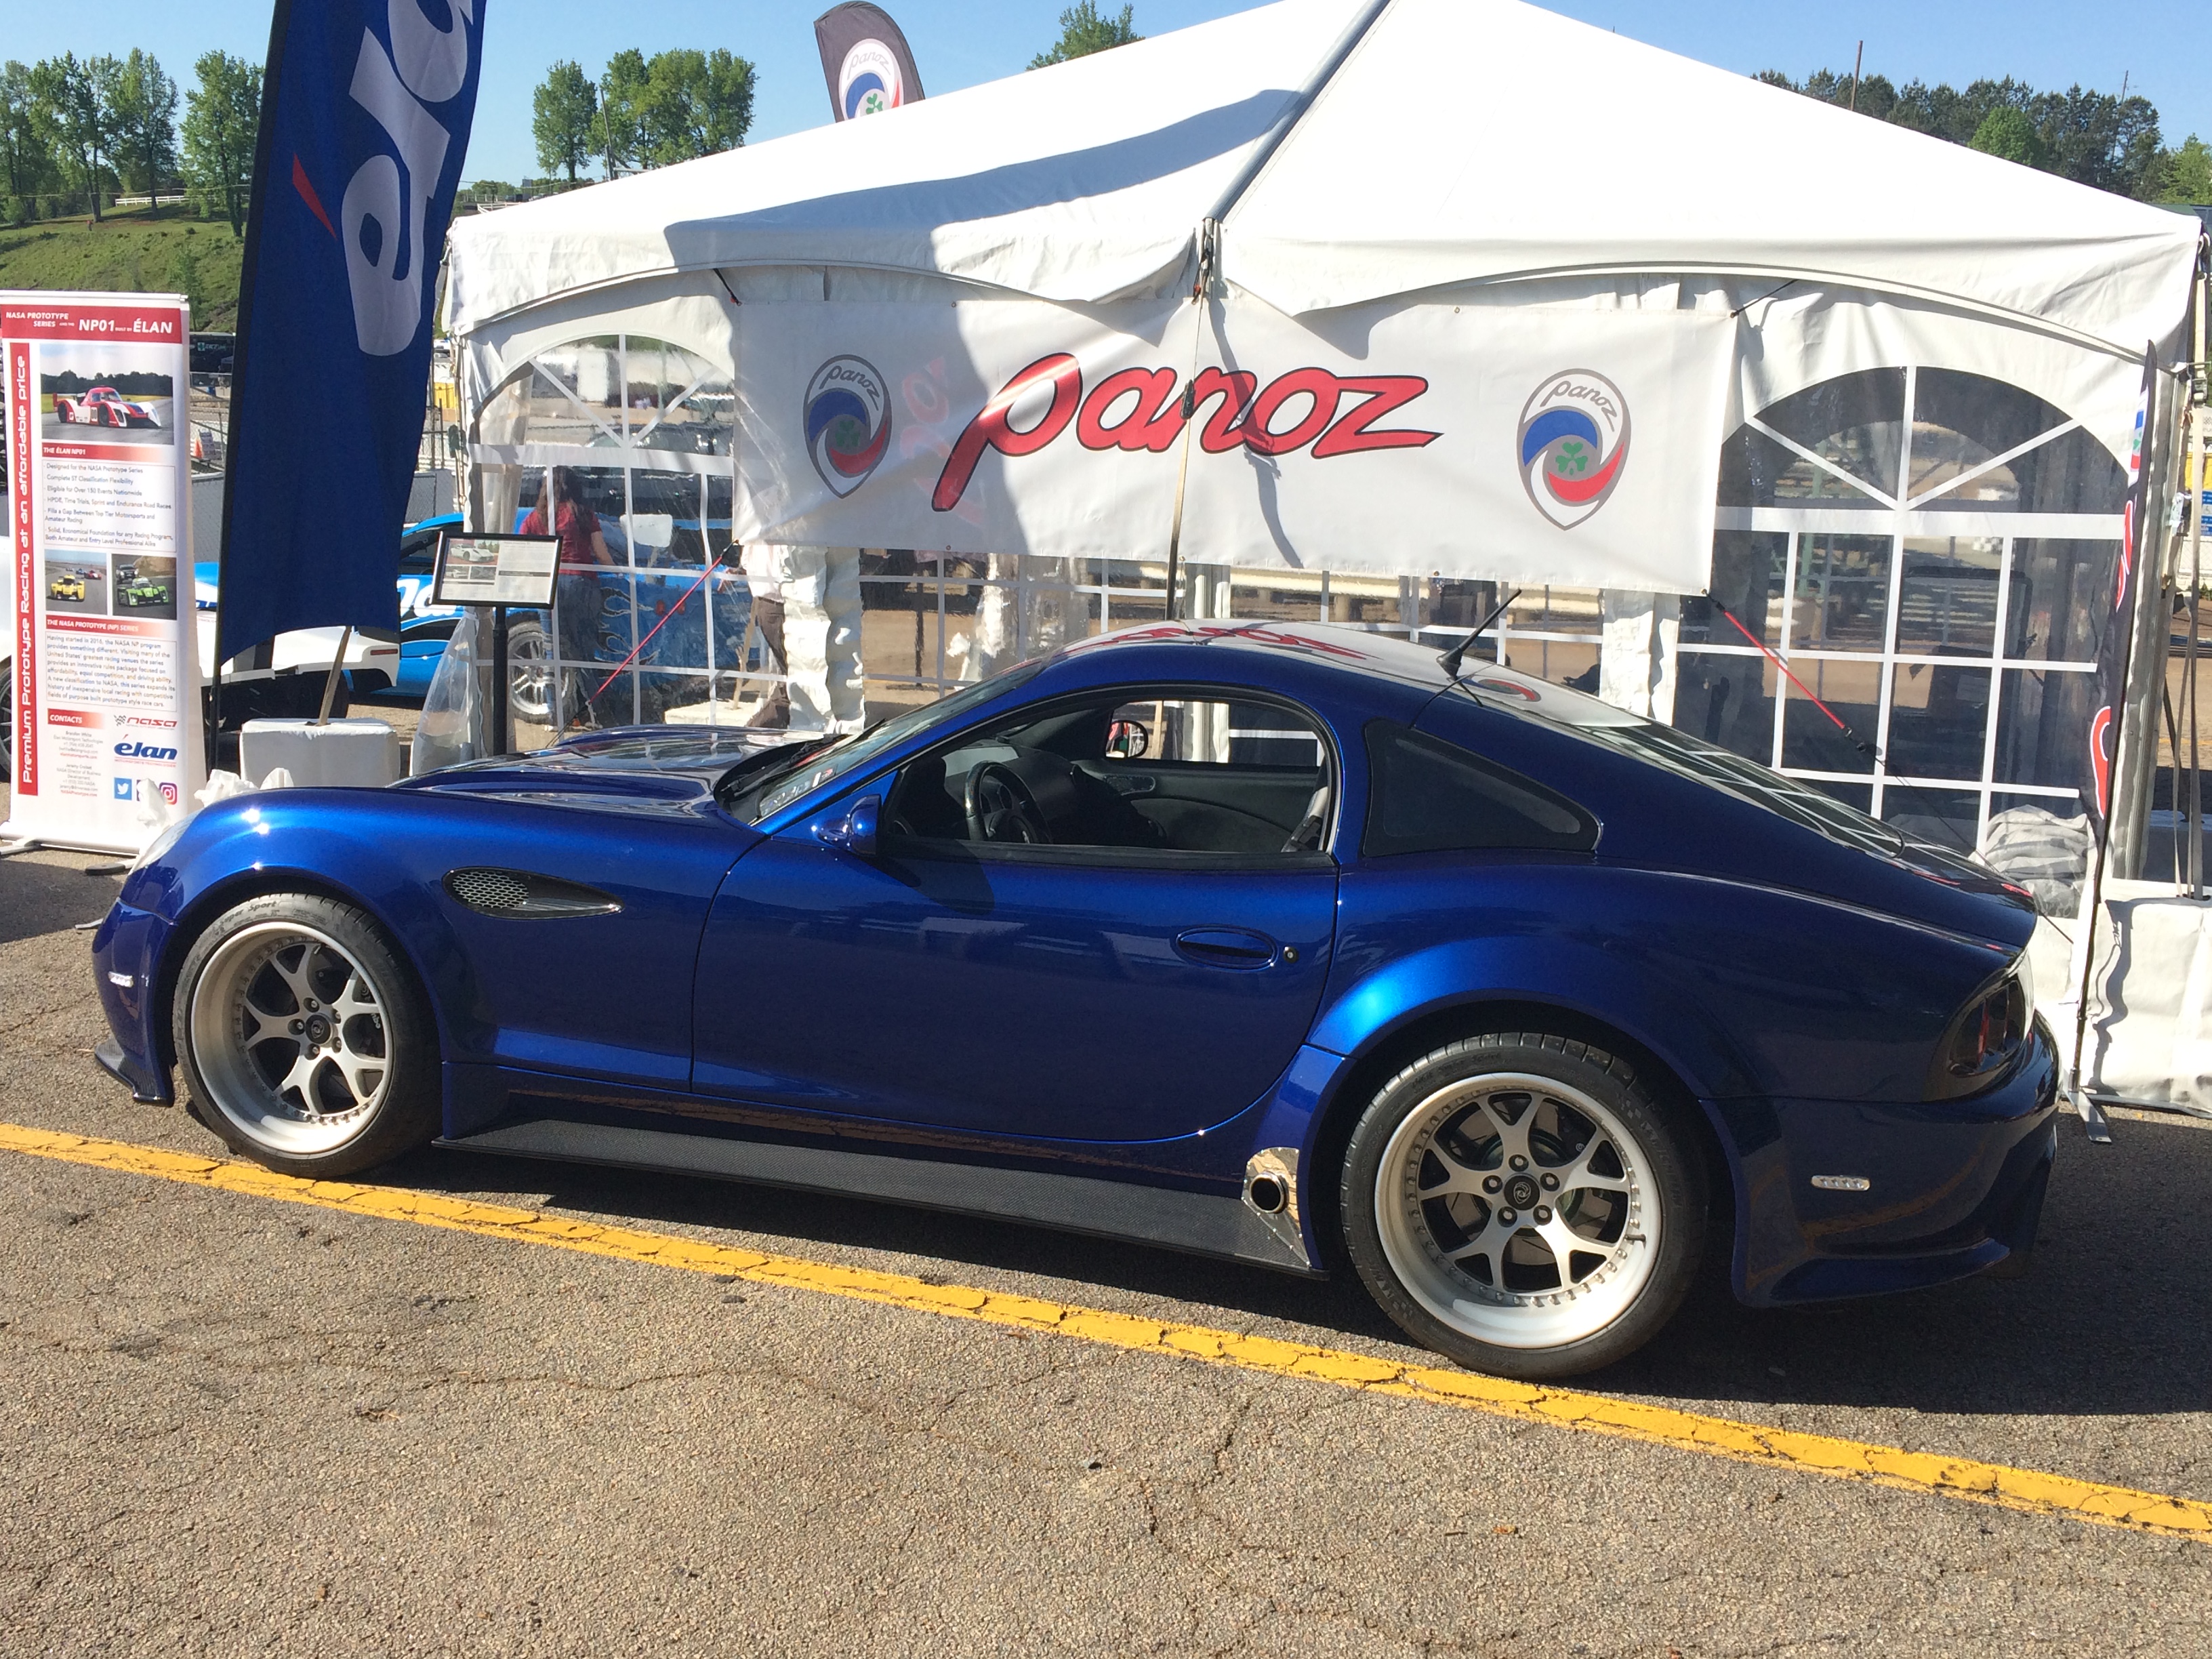 Panoz attends the 2018 Classic Motorsports Mitty